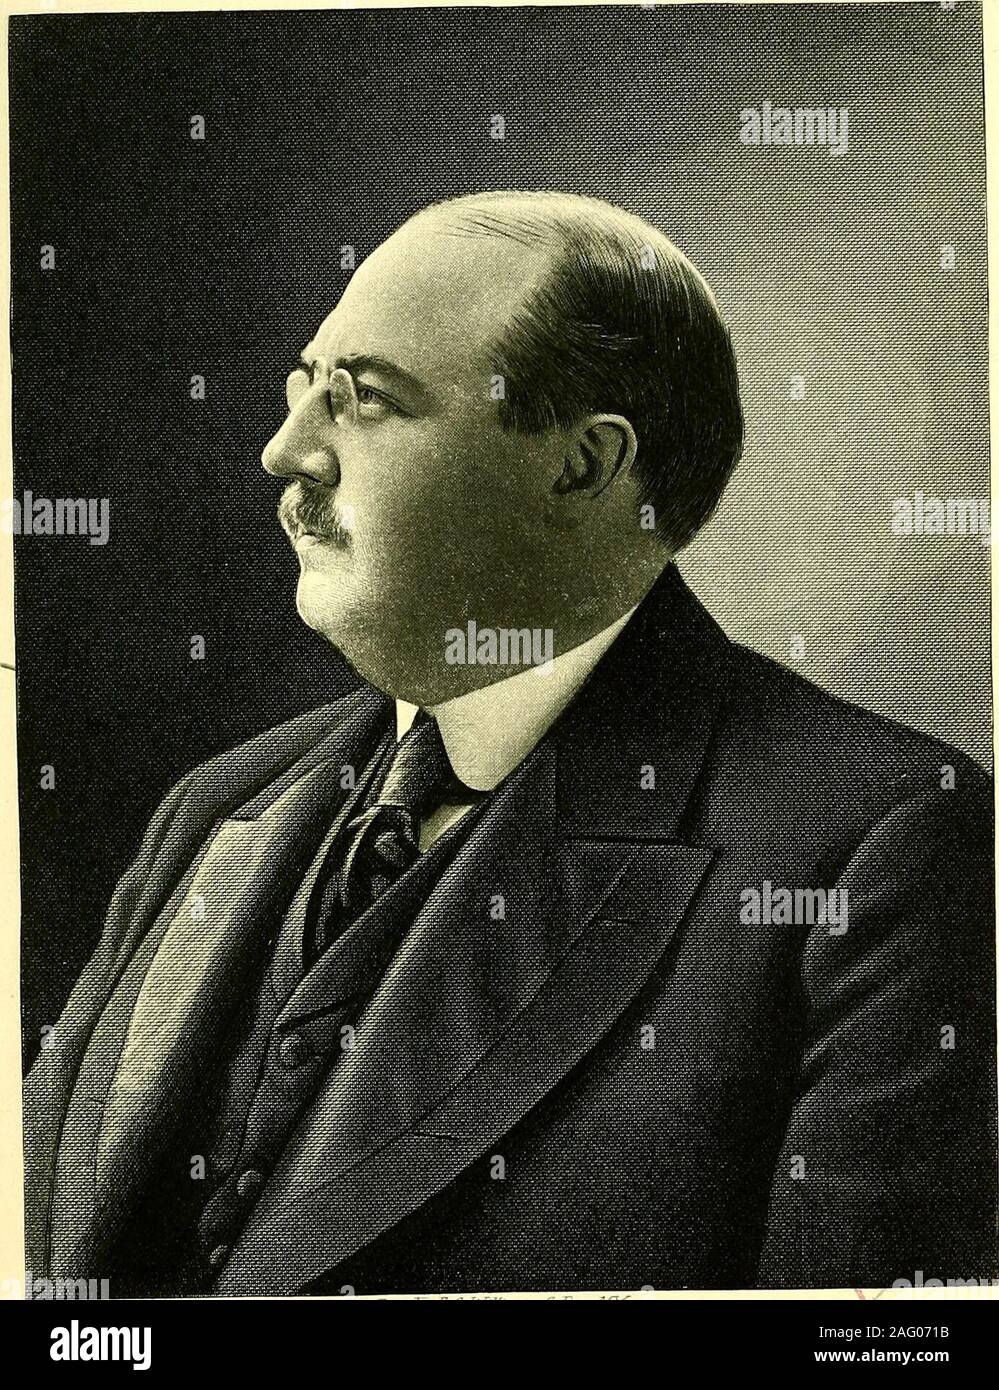 . Biographical history of Massachusetts : biographies and autobiographies of the leading men in the state. in 1901, 1902, 1903 and 1904, and he was electeda State Senator in 1905. In the house he served as Chairman ofthe Committees on Public Lighting and on Mercantile Affairs,and as a member of the Committee on Rules. He became affiliatedwith the Masonic fraternity and was a thirty-second degree Mason.He was a member of the Delta Psi fraternity, the Knights Templar,the Shrine, the Grange, the Nyasset Club of Springfield, the Sonsof the American Revolution, the Westfield Club and the WesternMas Stock Photo